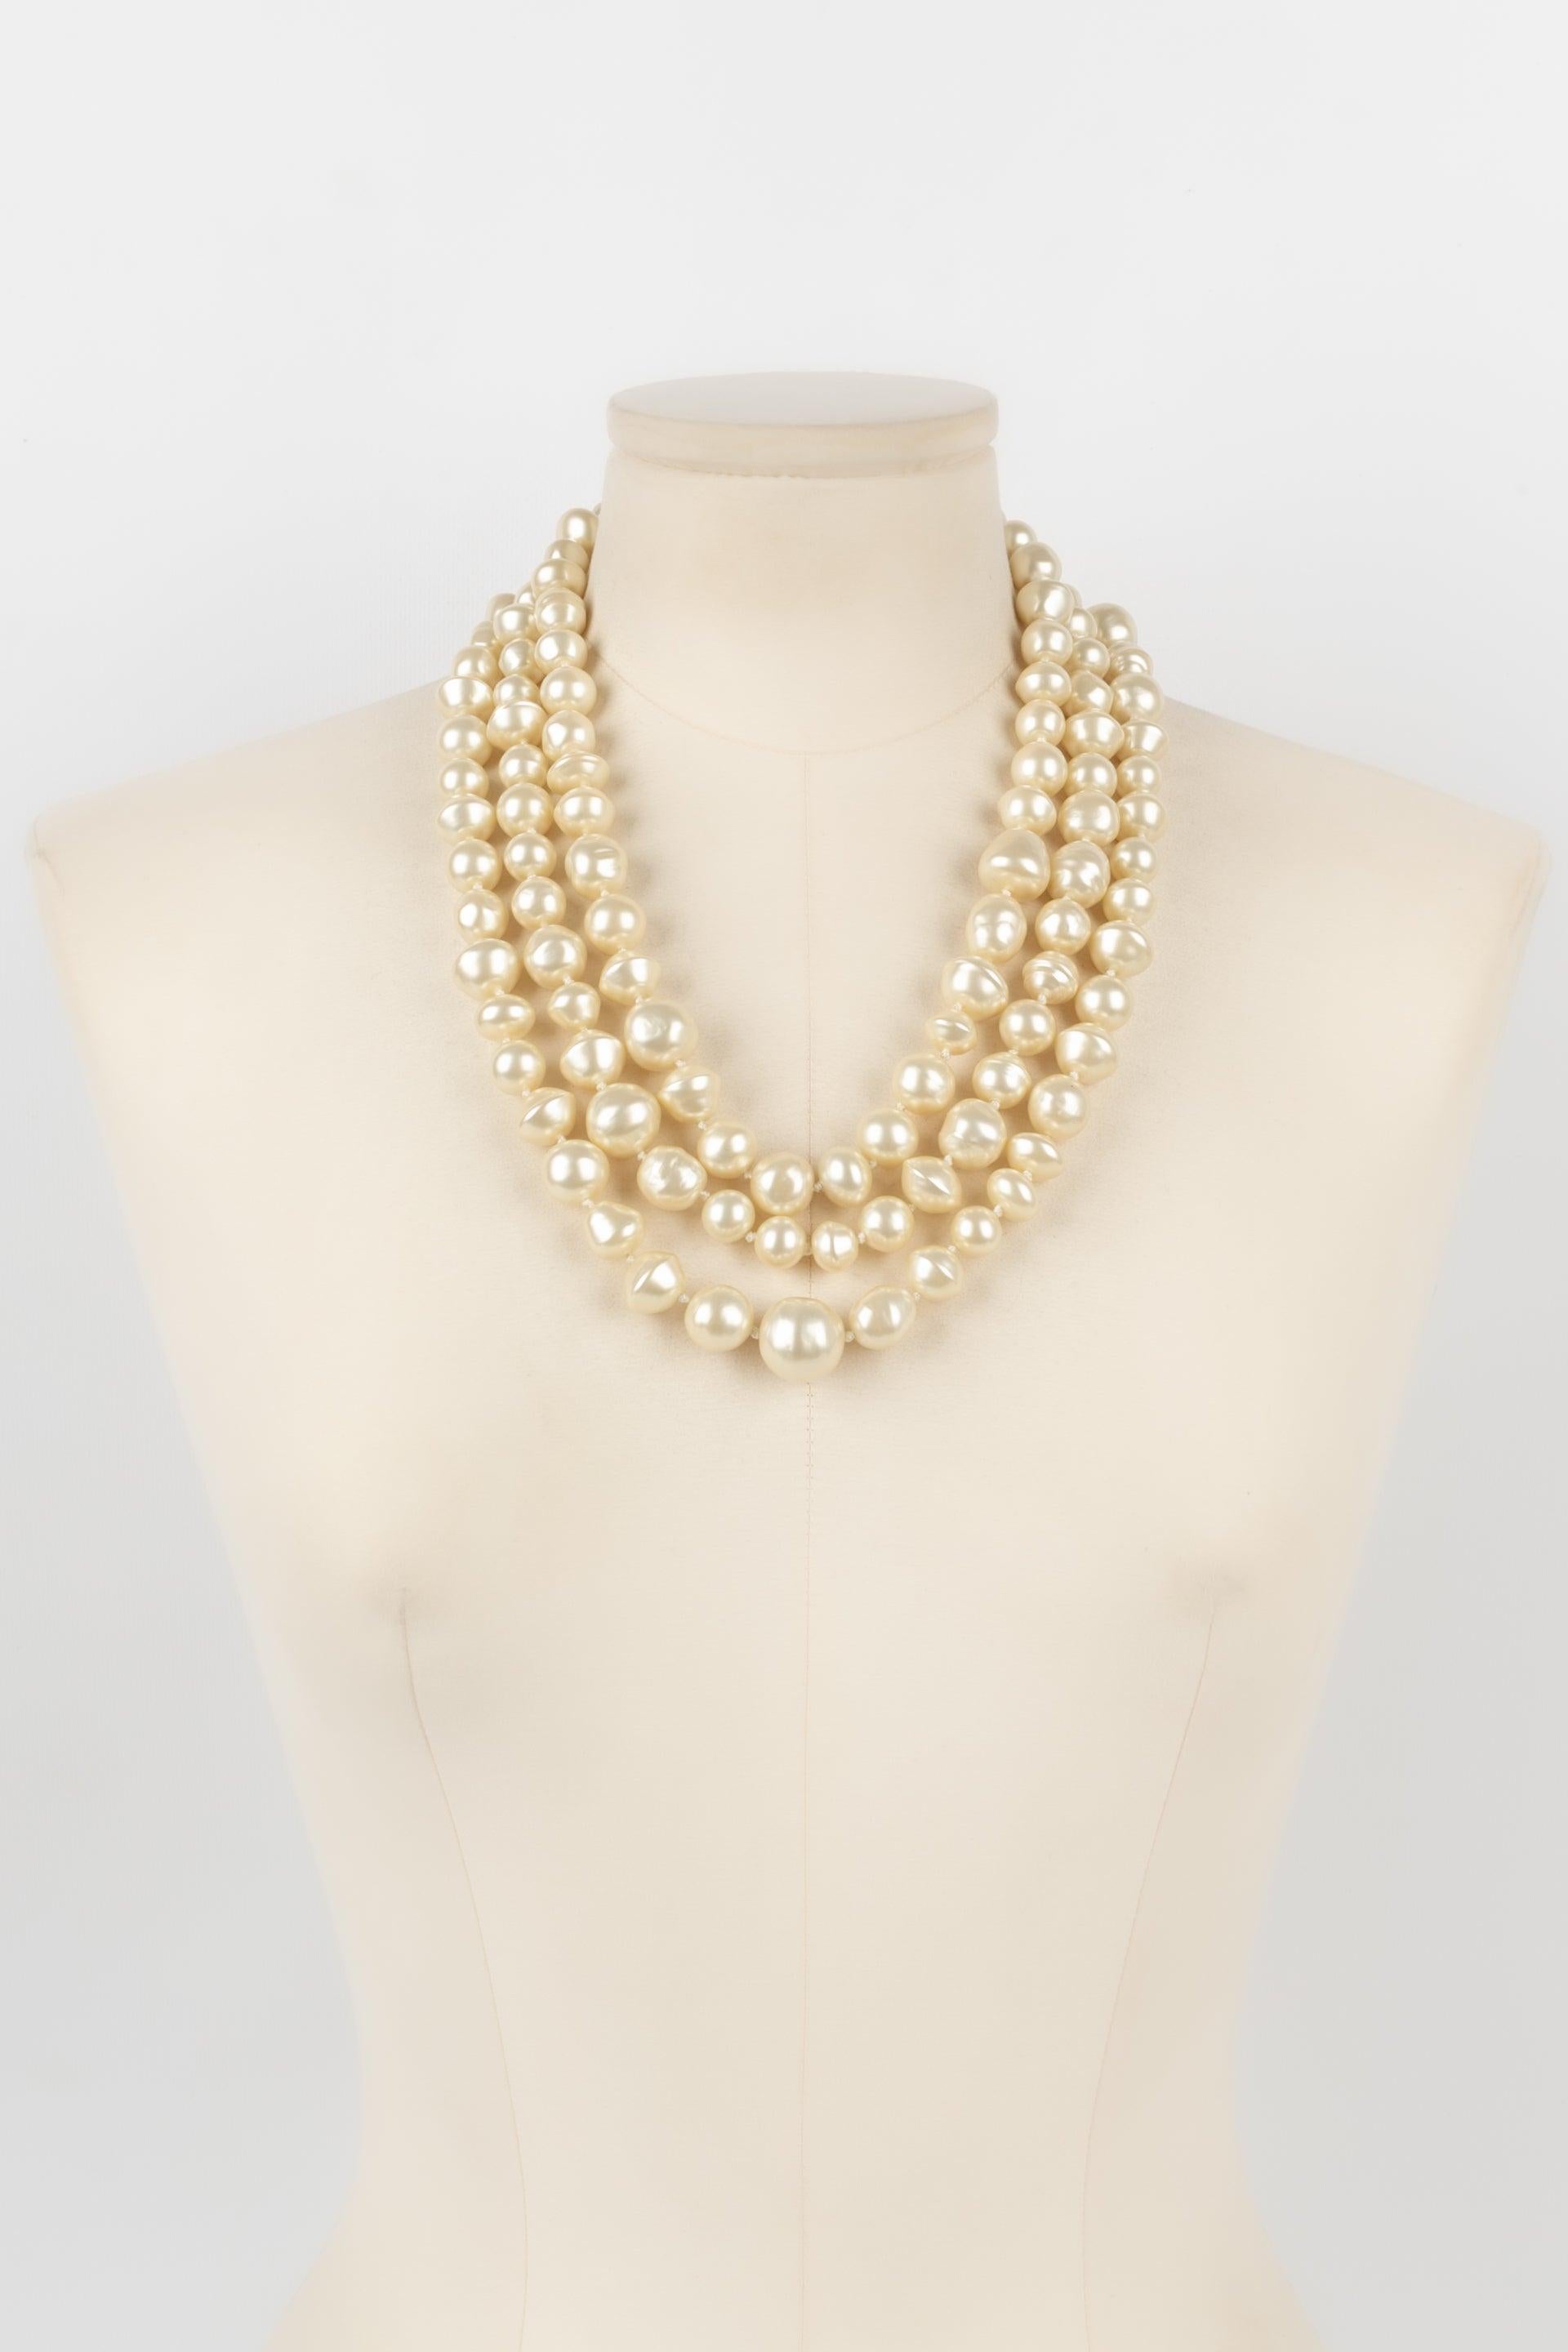 Chanel Three-row Necklace with Costume Pearls For Sale 4